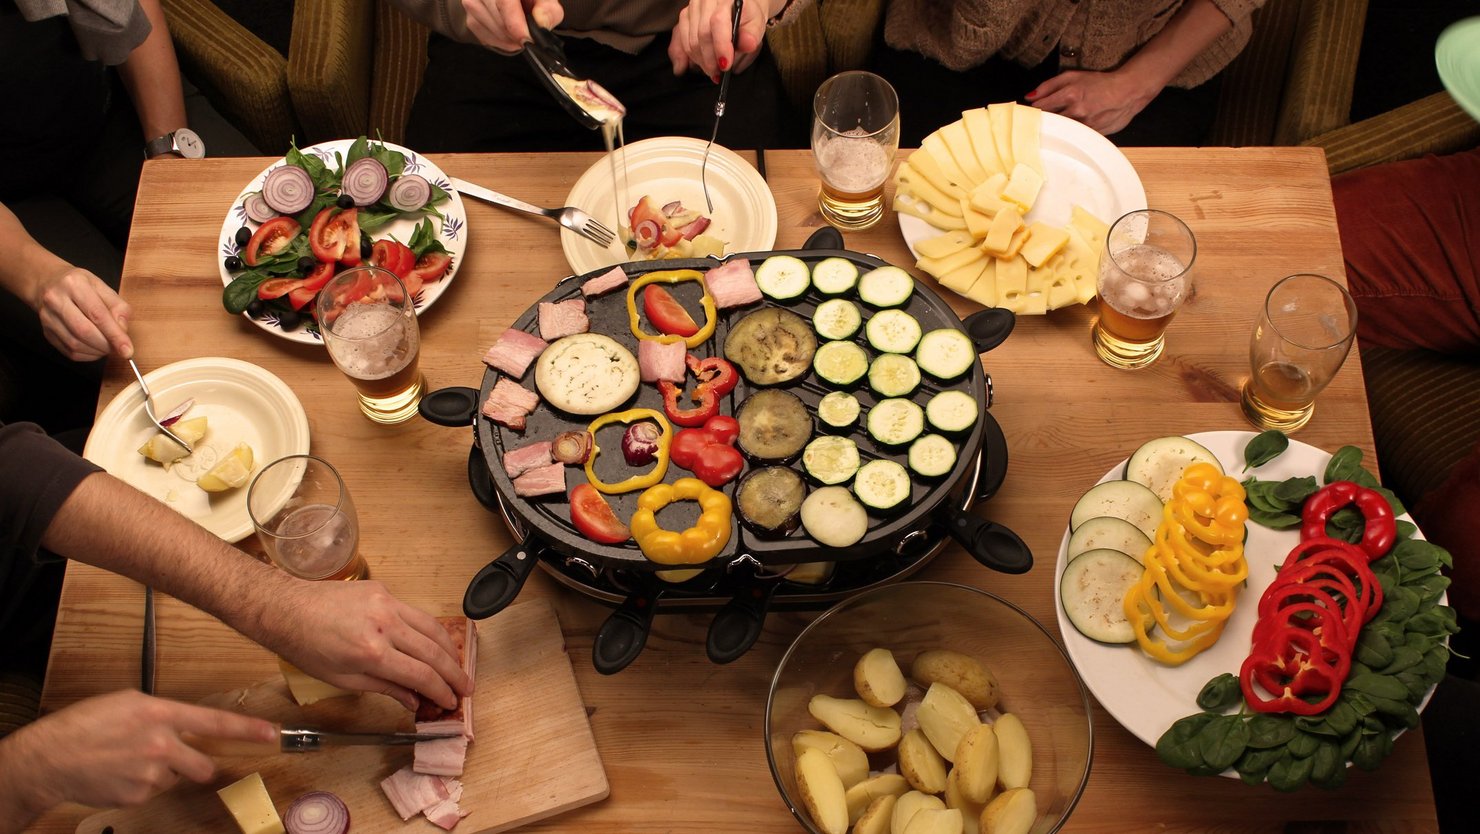 Table with raclette oven and dishes with potatoes, vegetables and cheese